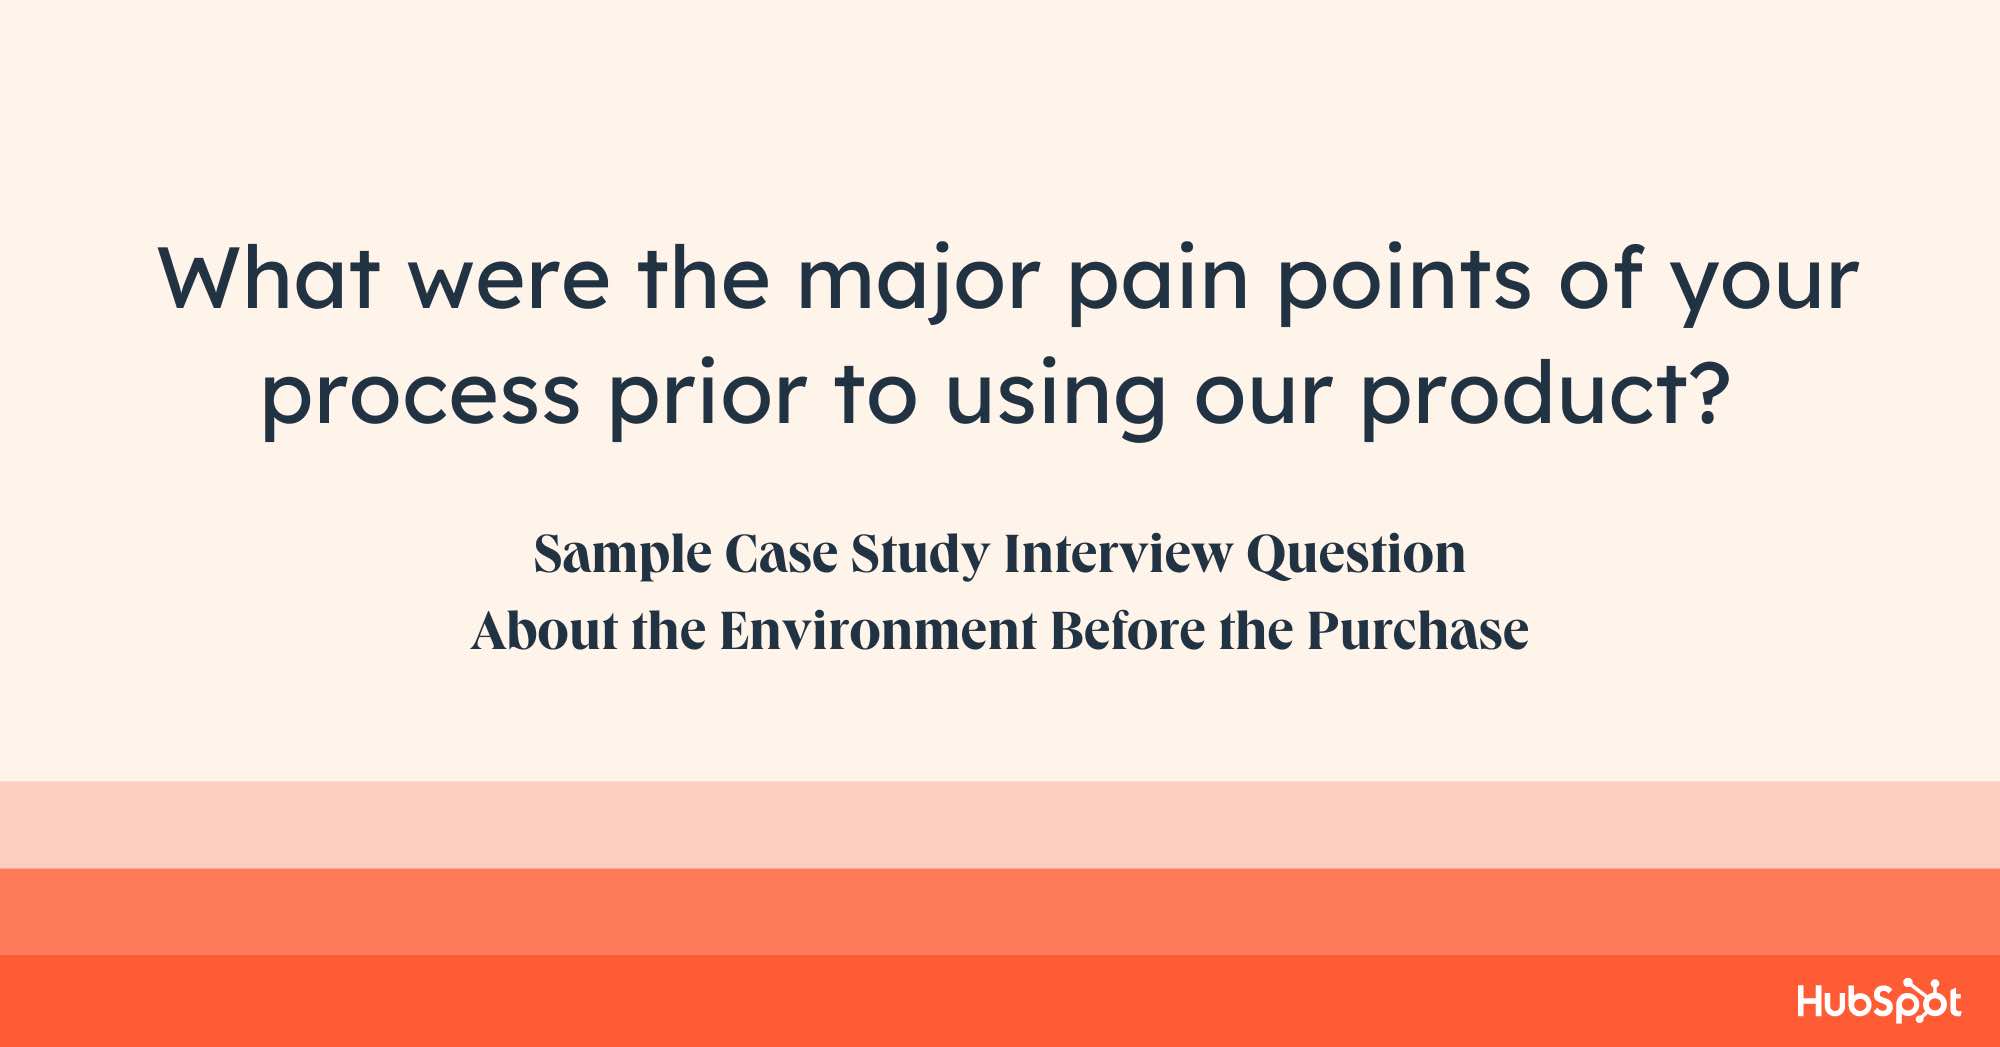 case study questions examples, what were the major pain points of your process prior to using our product?